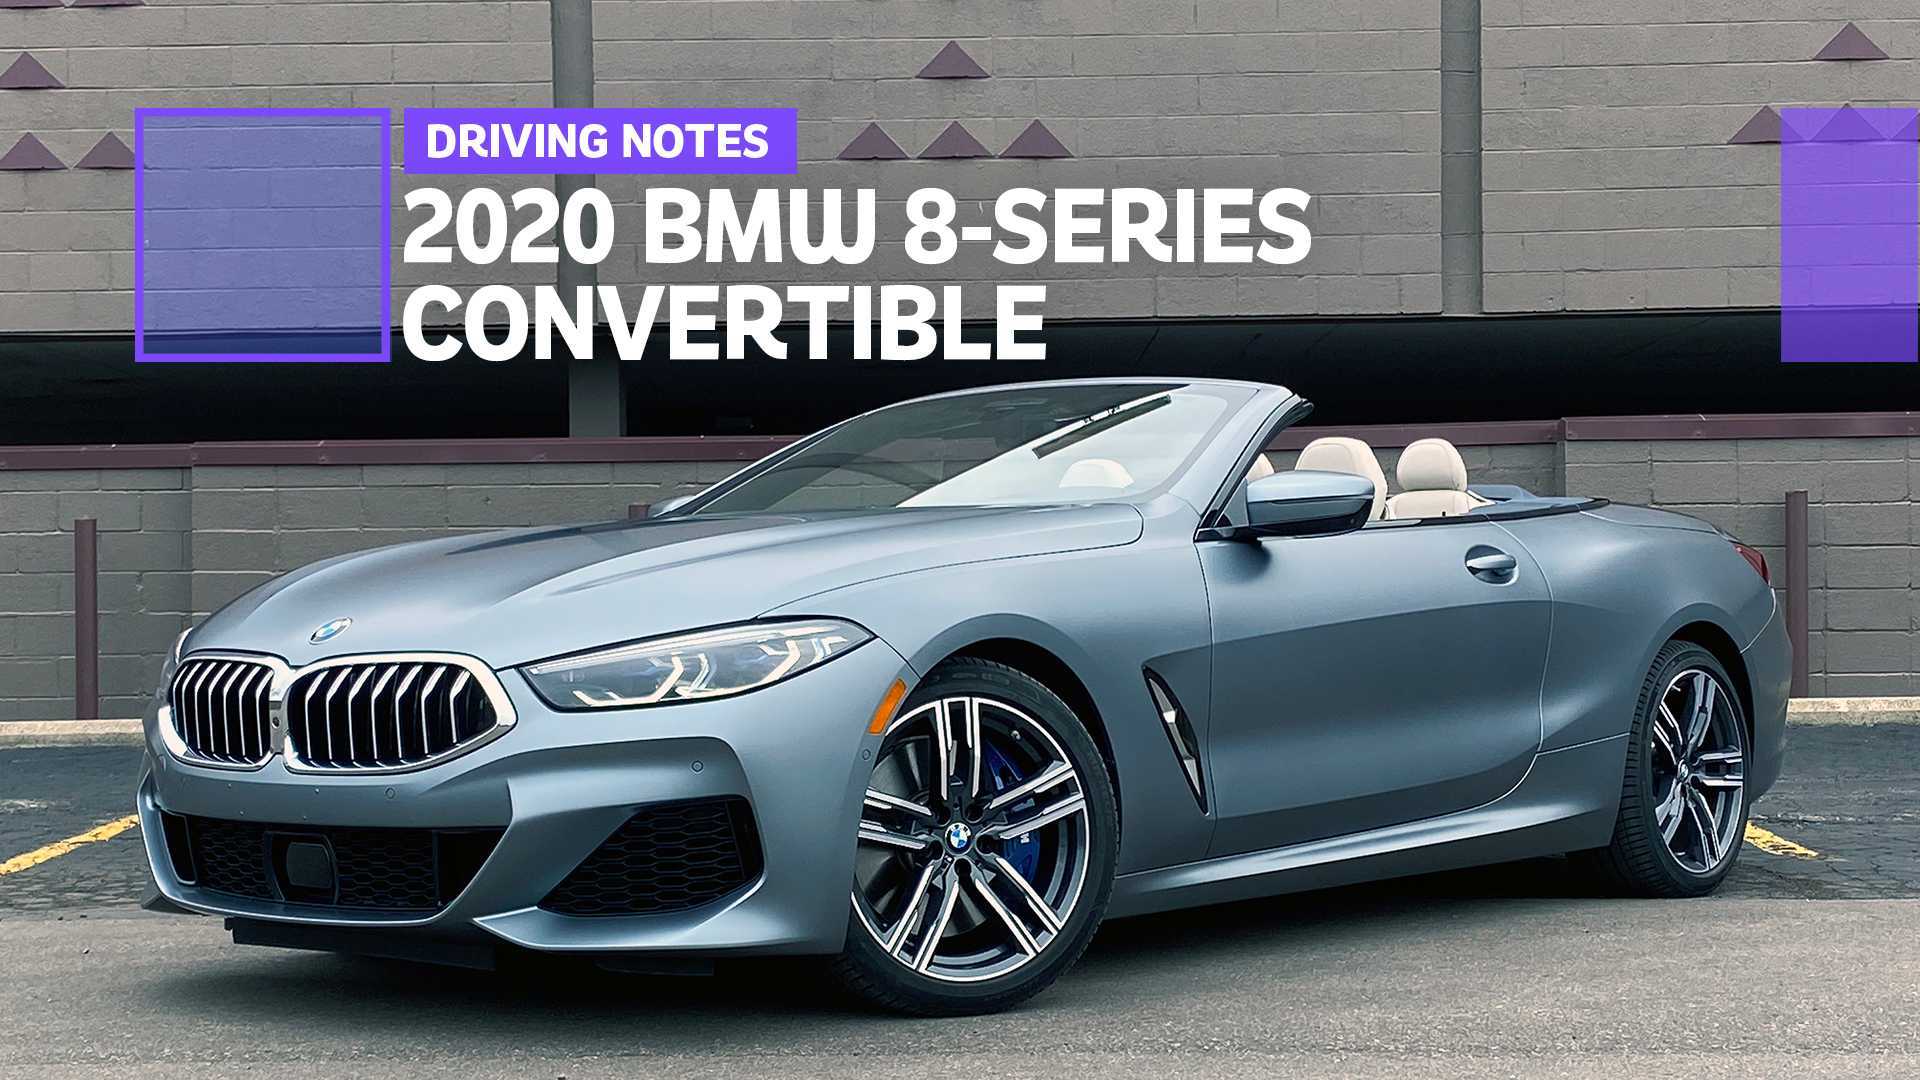 2020 BMW 840i Convertible Driving Notes: Capable Cruiser